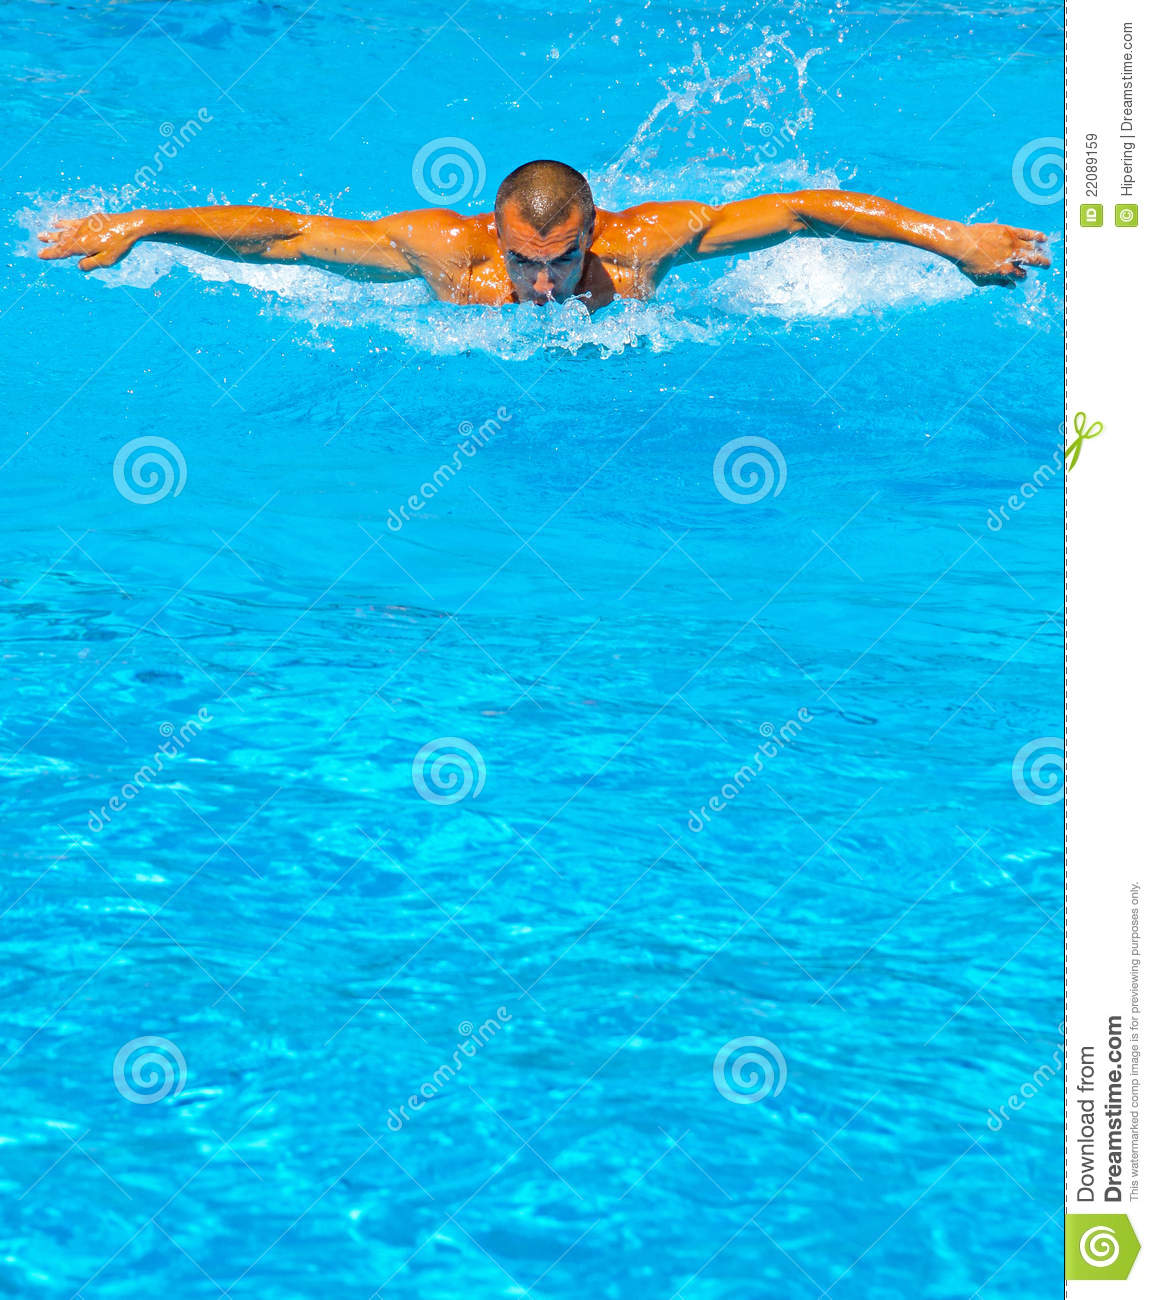 Butterfly Swimmer Royalty Free Stock Images   Image  22089159